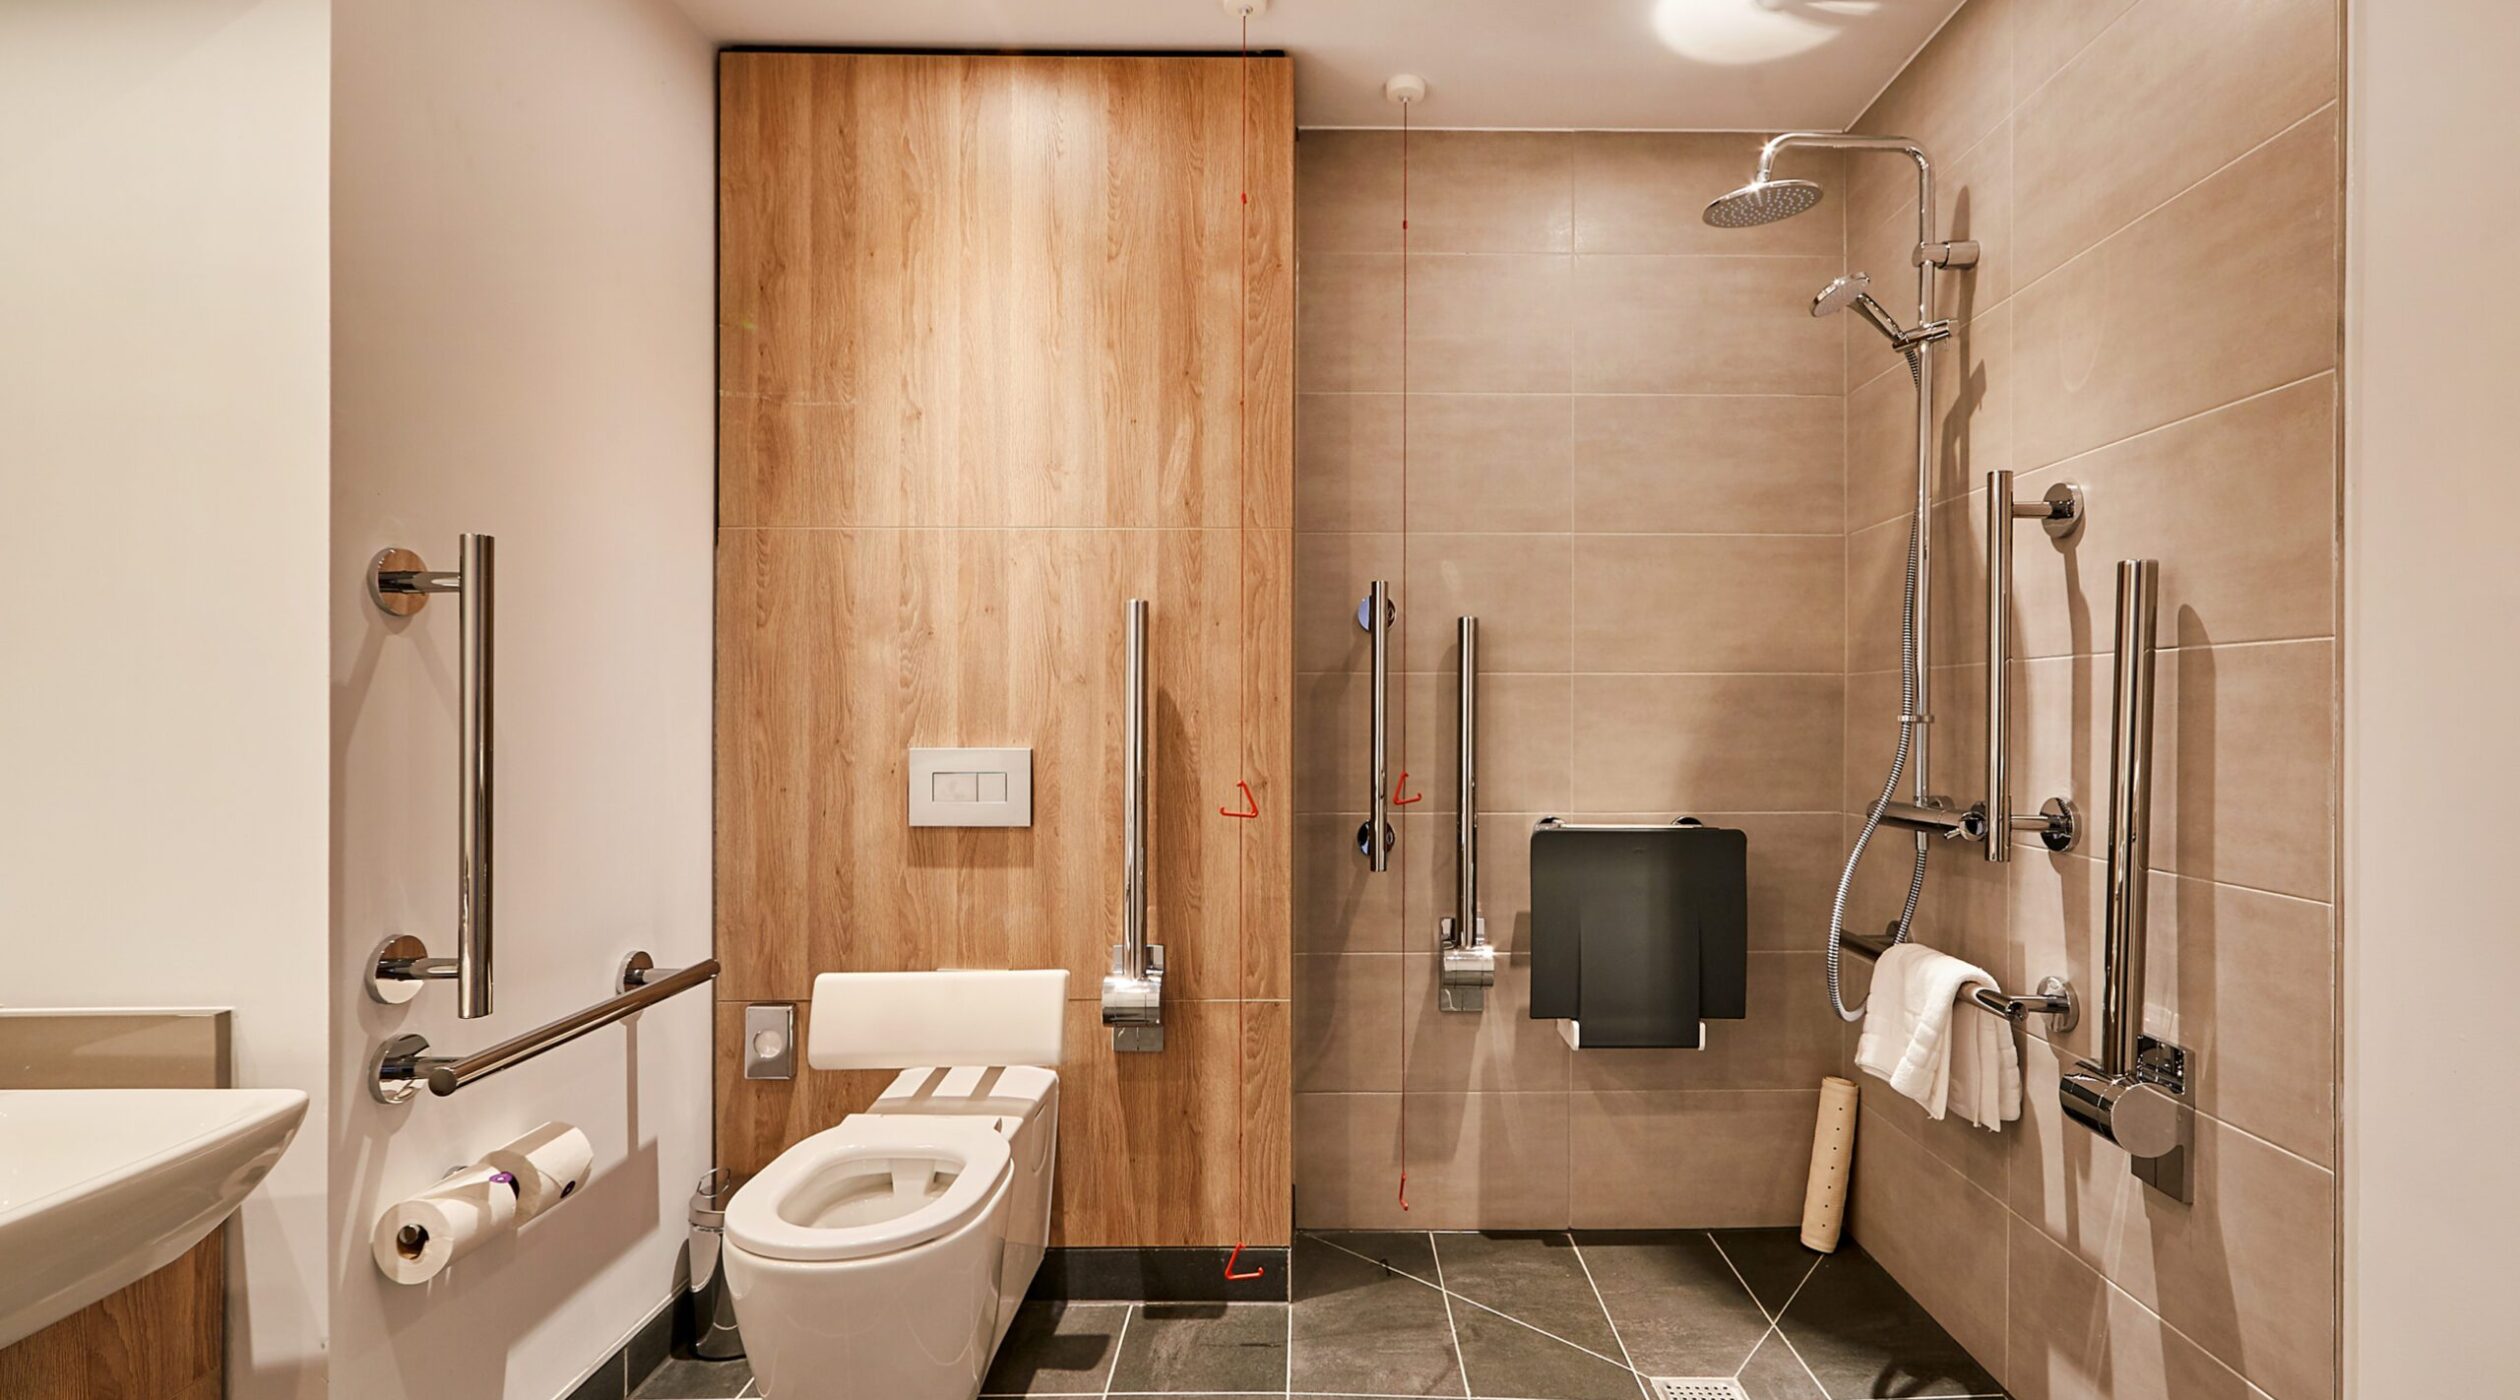 Park Regis Birmingham Accessible Bathroom in the deluxe room type, with a toilet, shower and sink